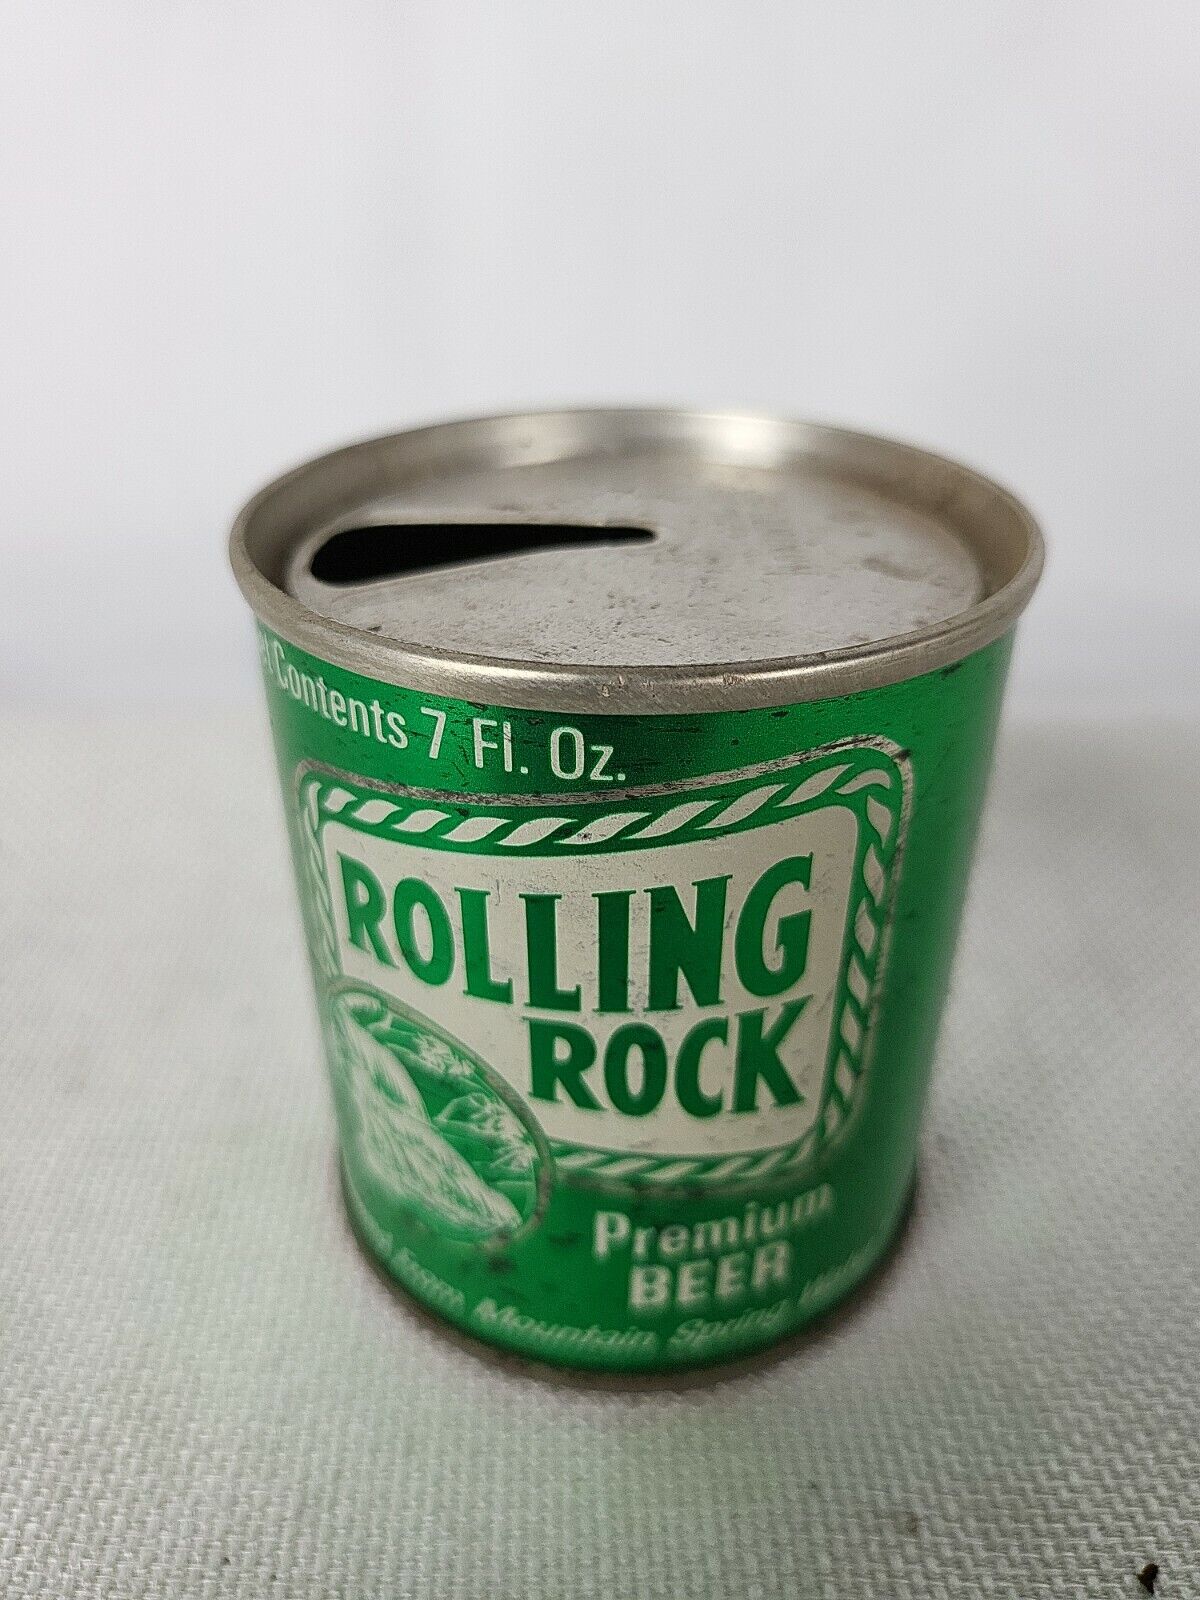 ROLLING ROCK STRAIGHT STEEL PULL TAB 7oz. EMPTY BEER CAN EMPTY